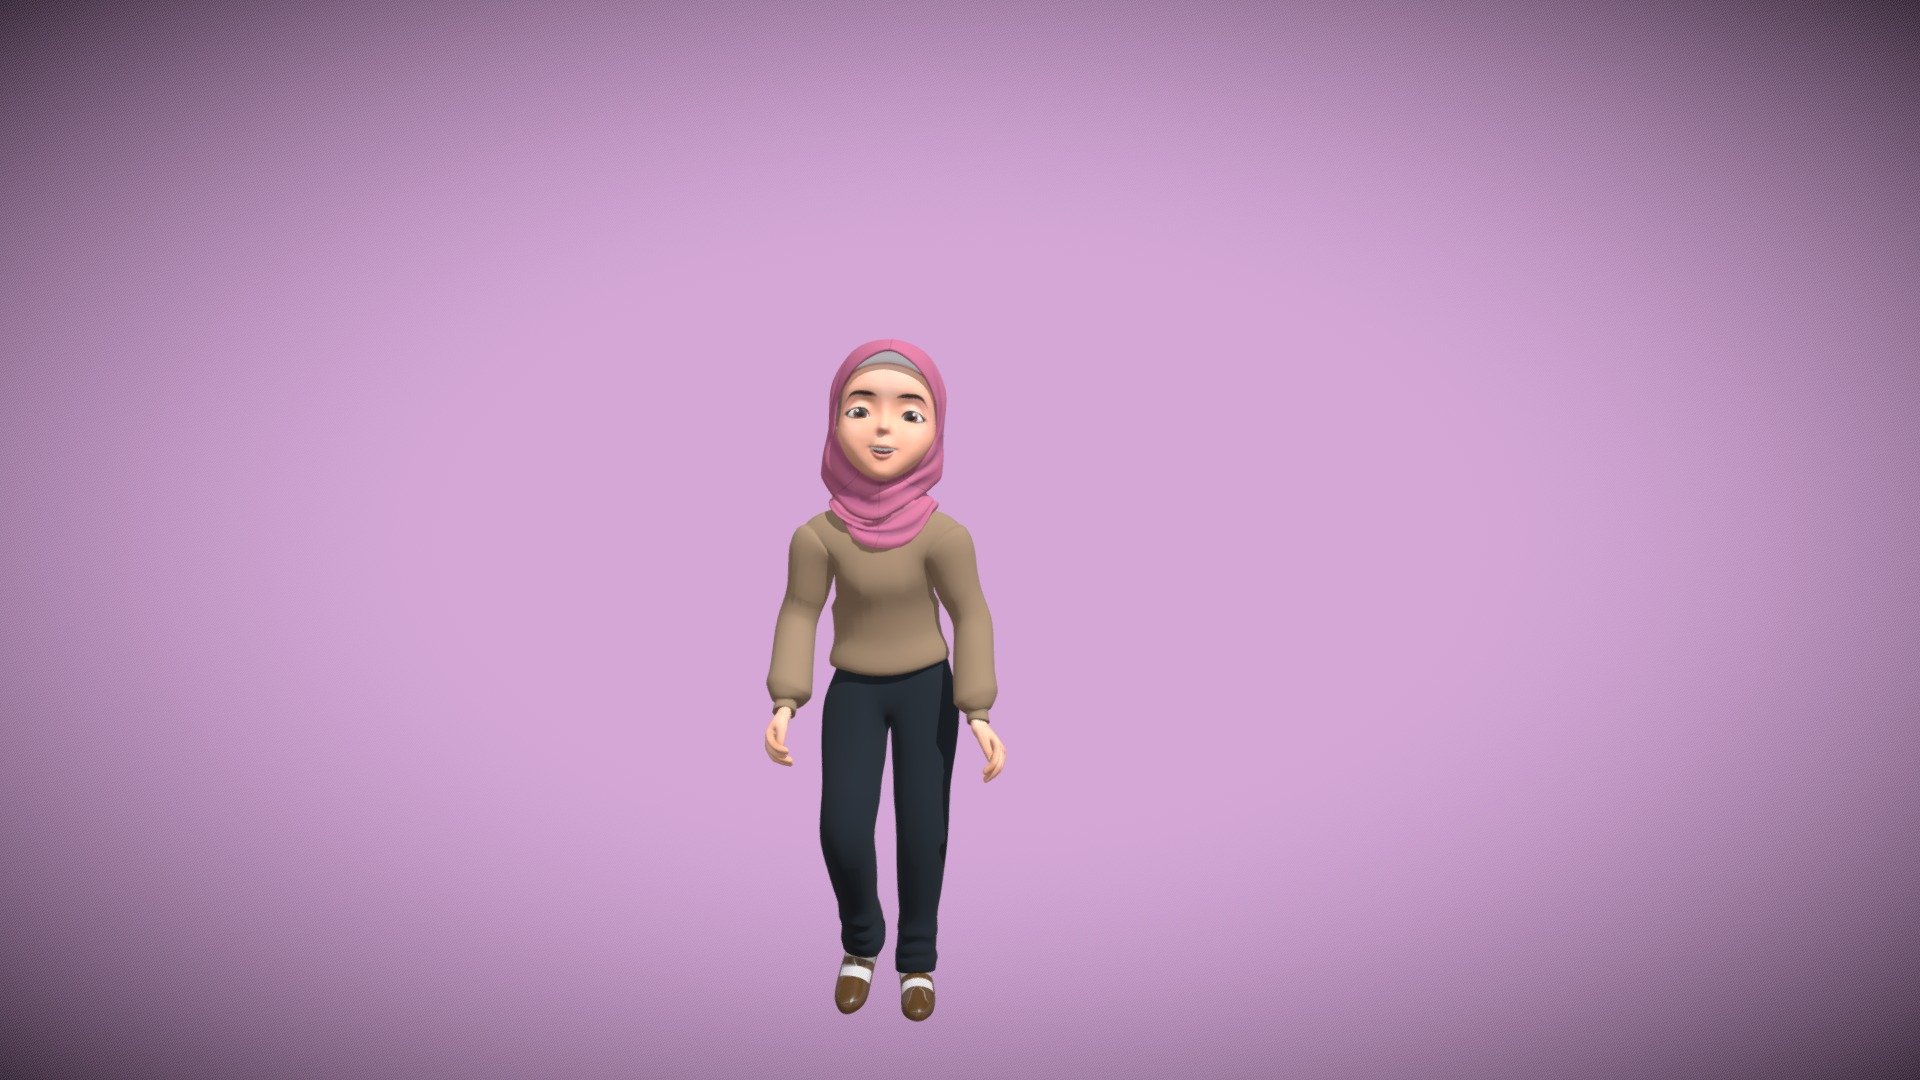 3d Model of a muslim women made in blender . This model is rigged and animated and ready to use. It’s compatible with mixamo so you can download more animation for it. feel free to email me and ask me any thing “mostafaebrahiem1998@gmail.com” Enjoy 3d model